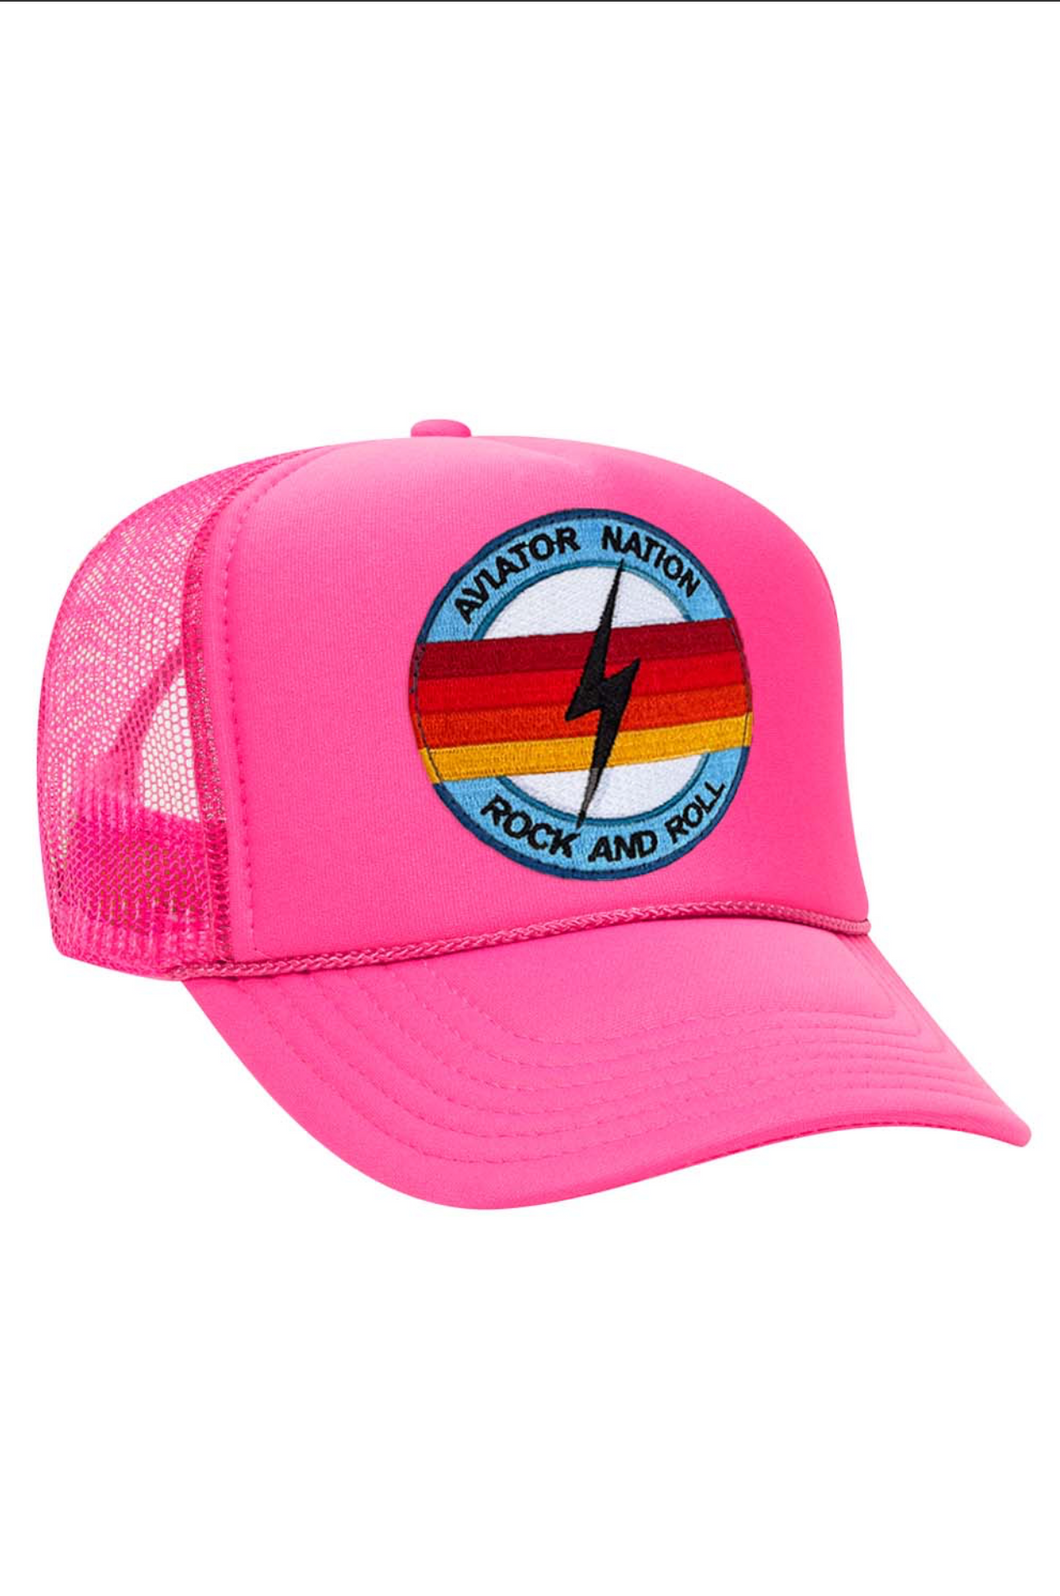 AVIATOR NATION ROCK AND ROLL BOLT VINTAGE TRUCKER HAT IN NEON PINK